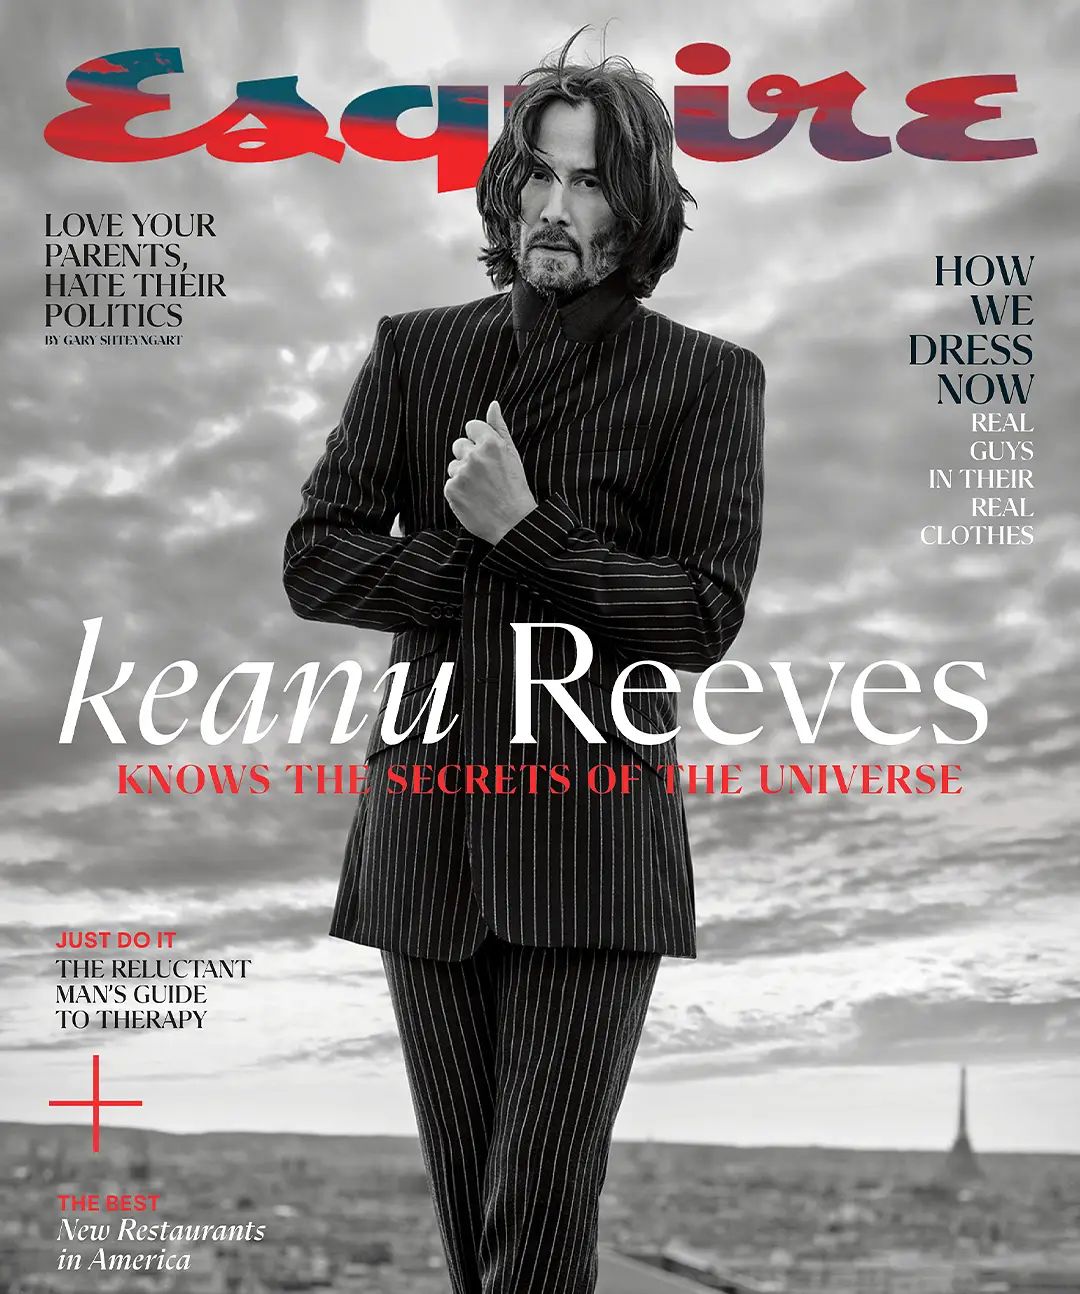 Keenu Reeves on the cover of Esquire Mag